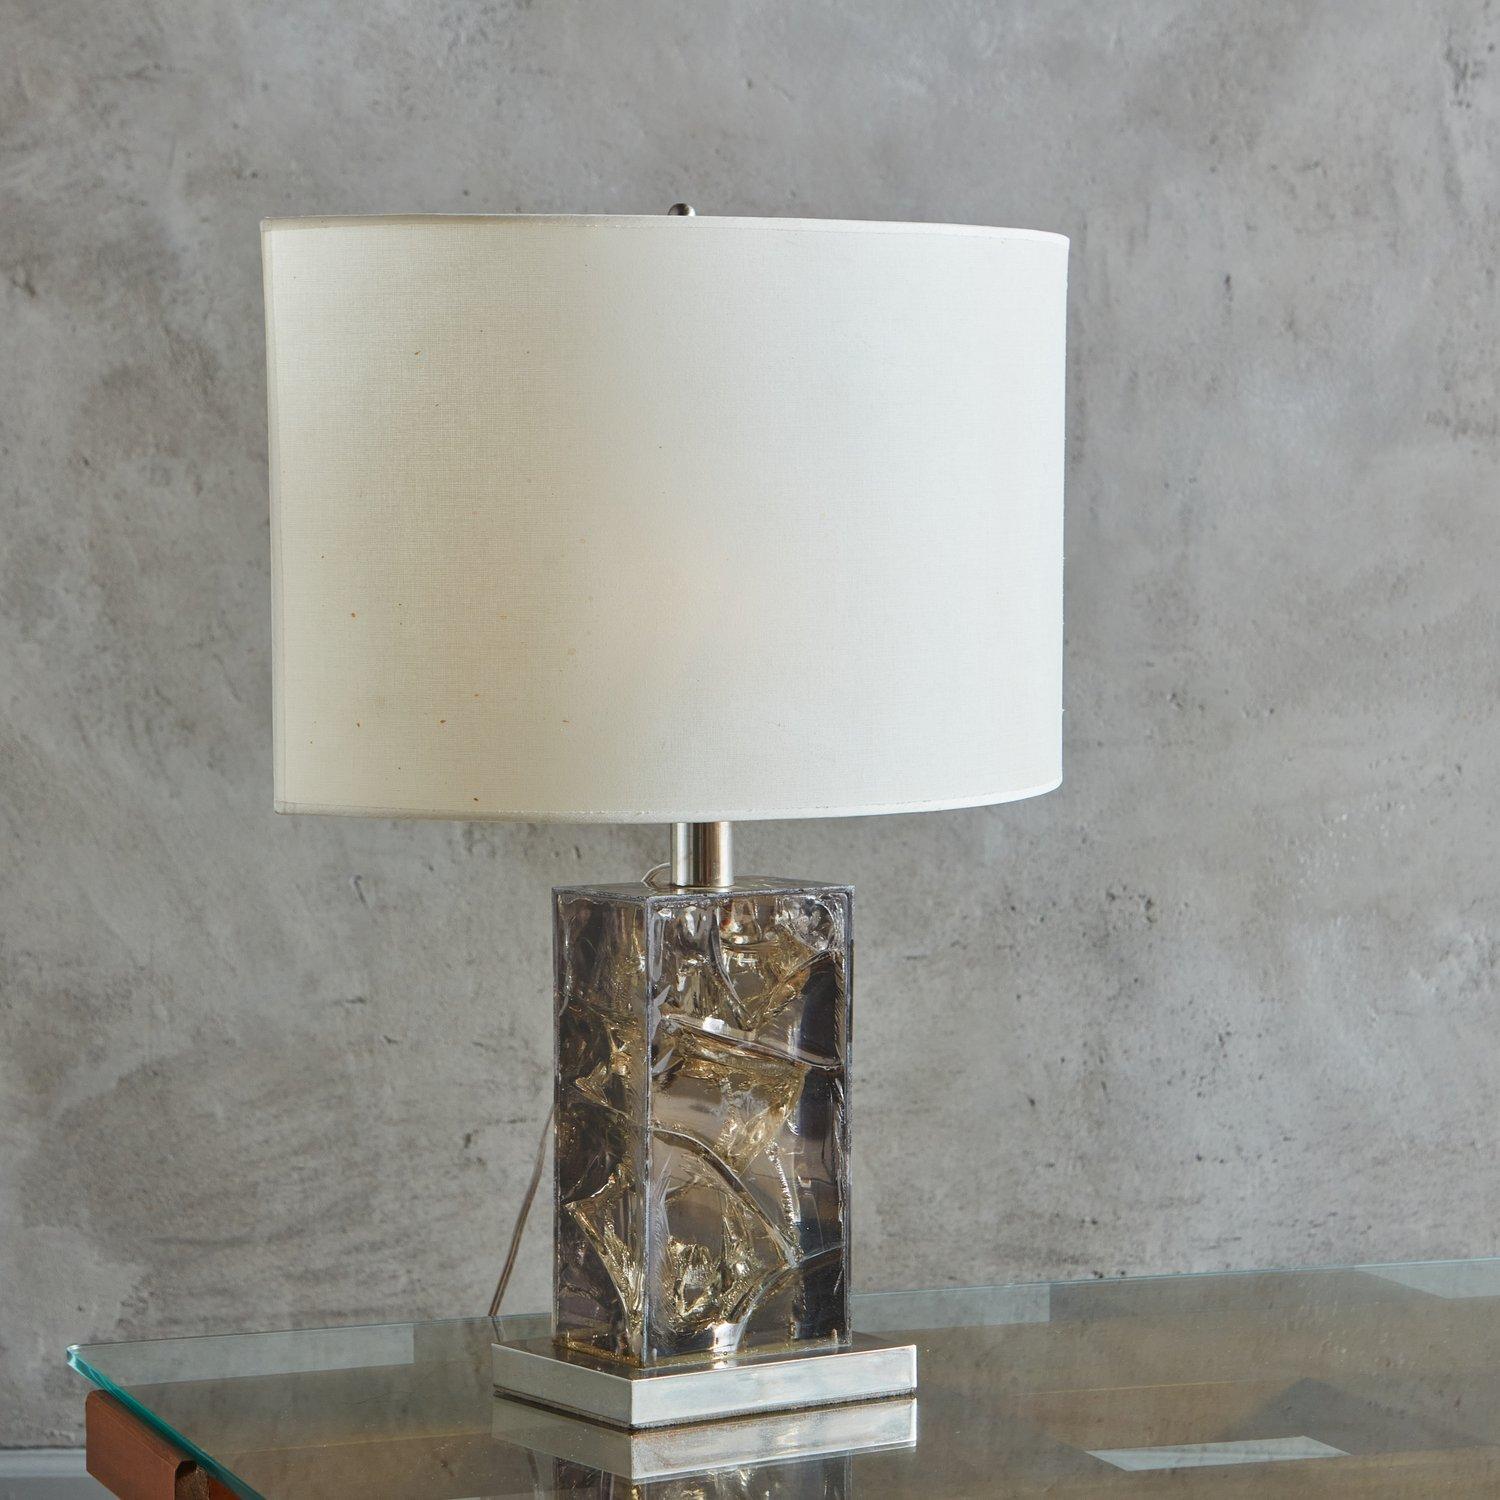 A vintage French table lamp featuring a rectangular fractured resin body in a gorgeous smoked hue with a chrome metal base and hardware. This lamp retains its original almond shaped white fabric shade. Unmarked. Sourced in France, 20th